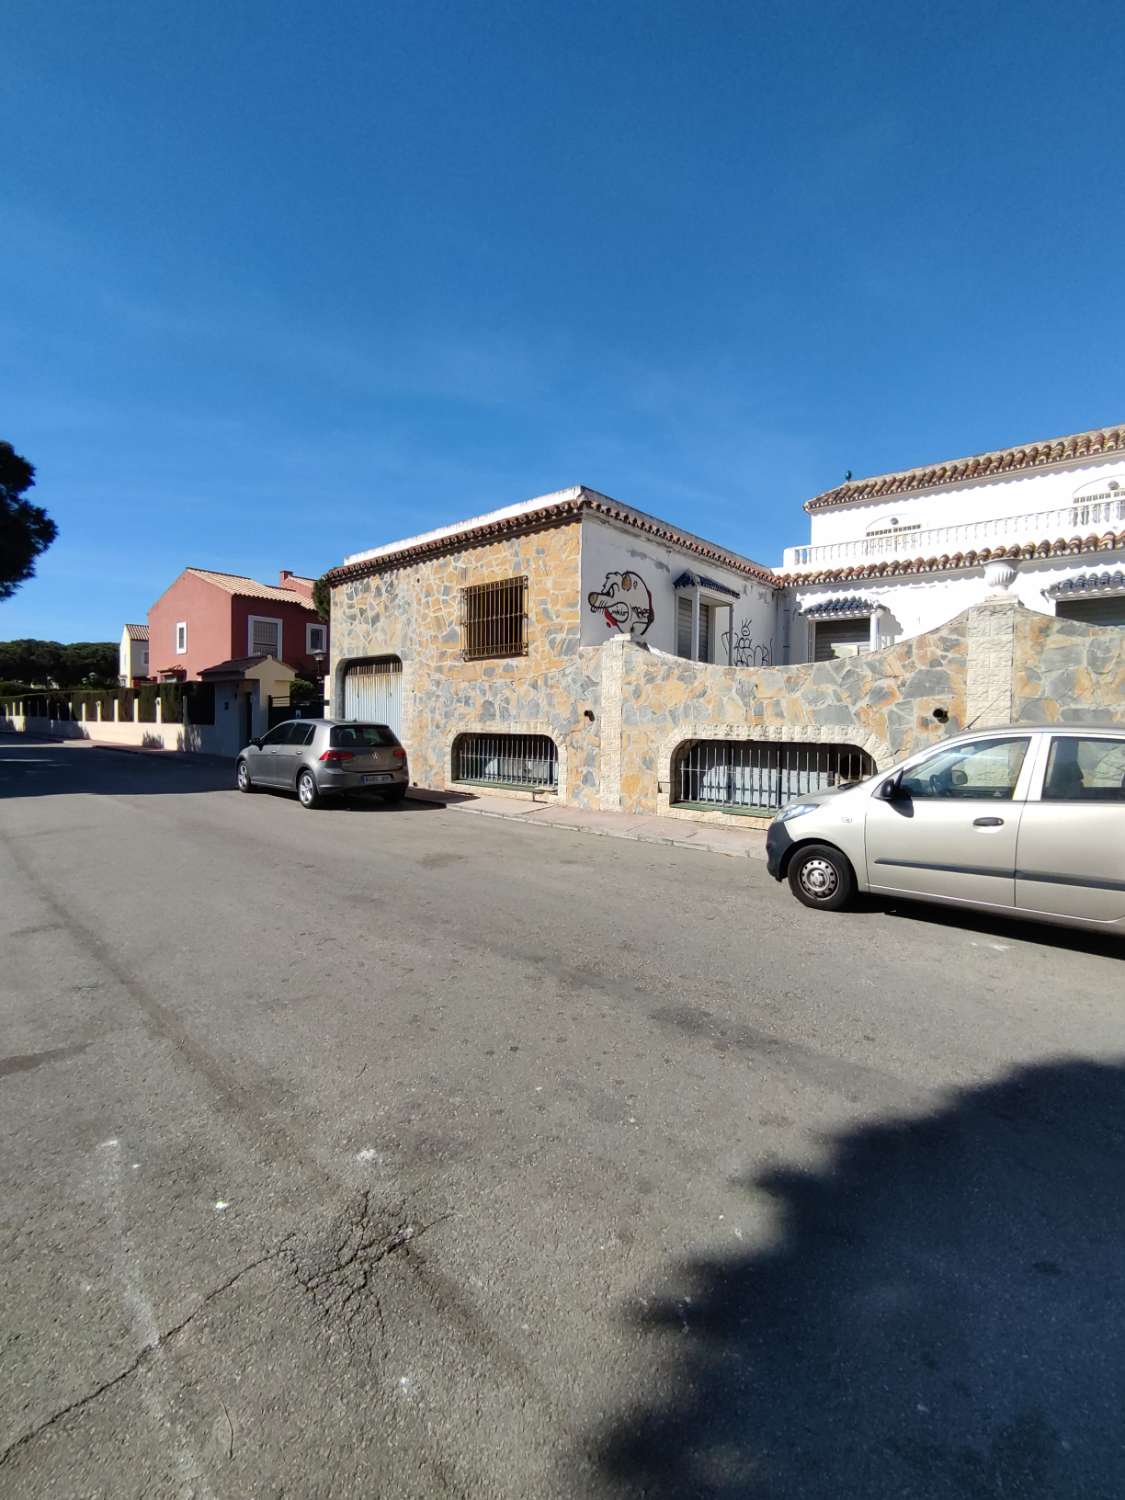 This local is available to purchase, rent or rent with option to purchase. It is situated in a busy part of Calahonda.